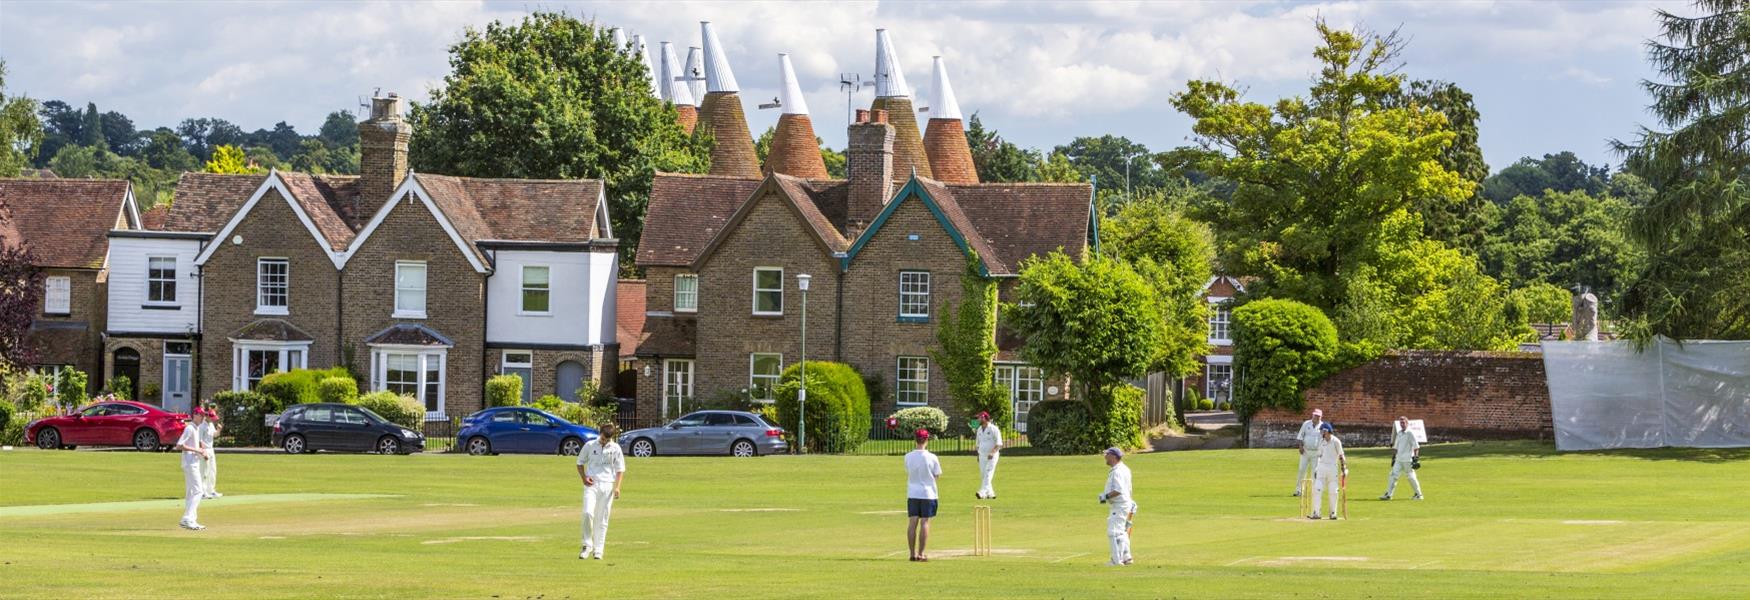 Cricket on Bearsted Green